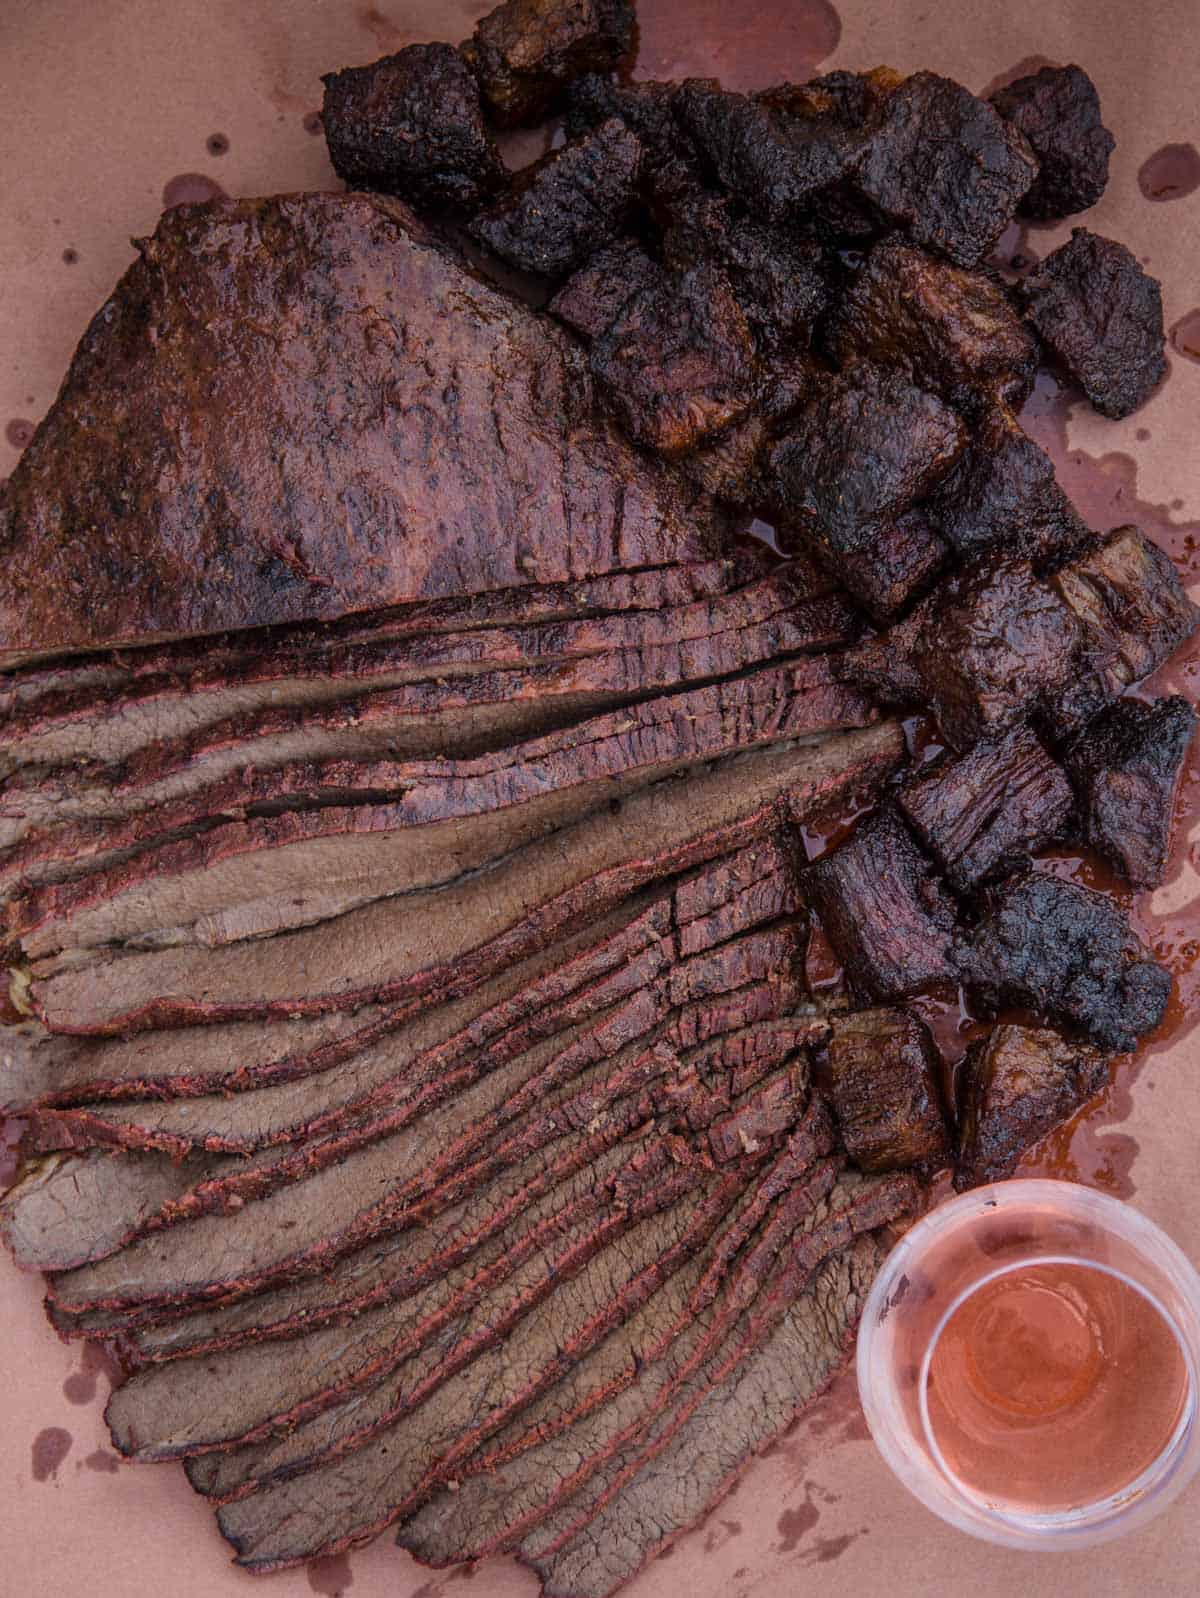 Smoked brisket burnt ends and sliced flat.